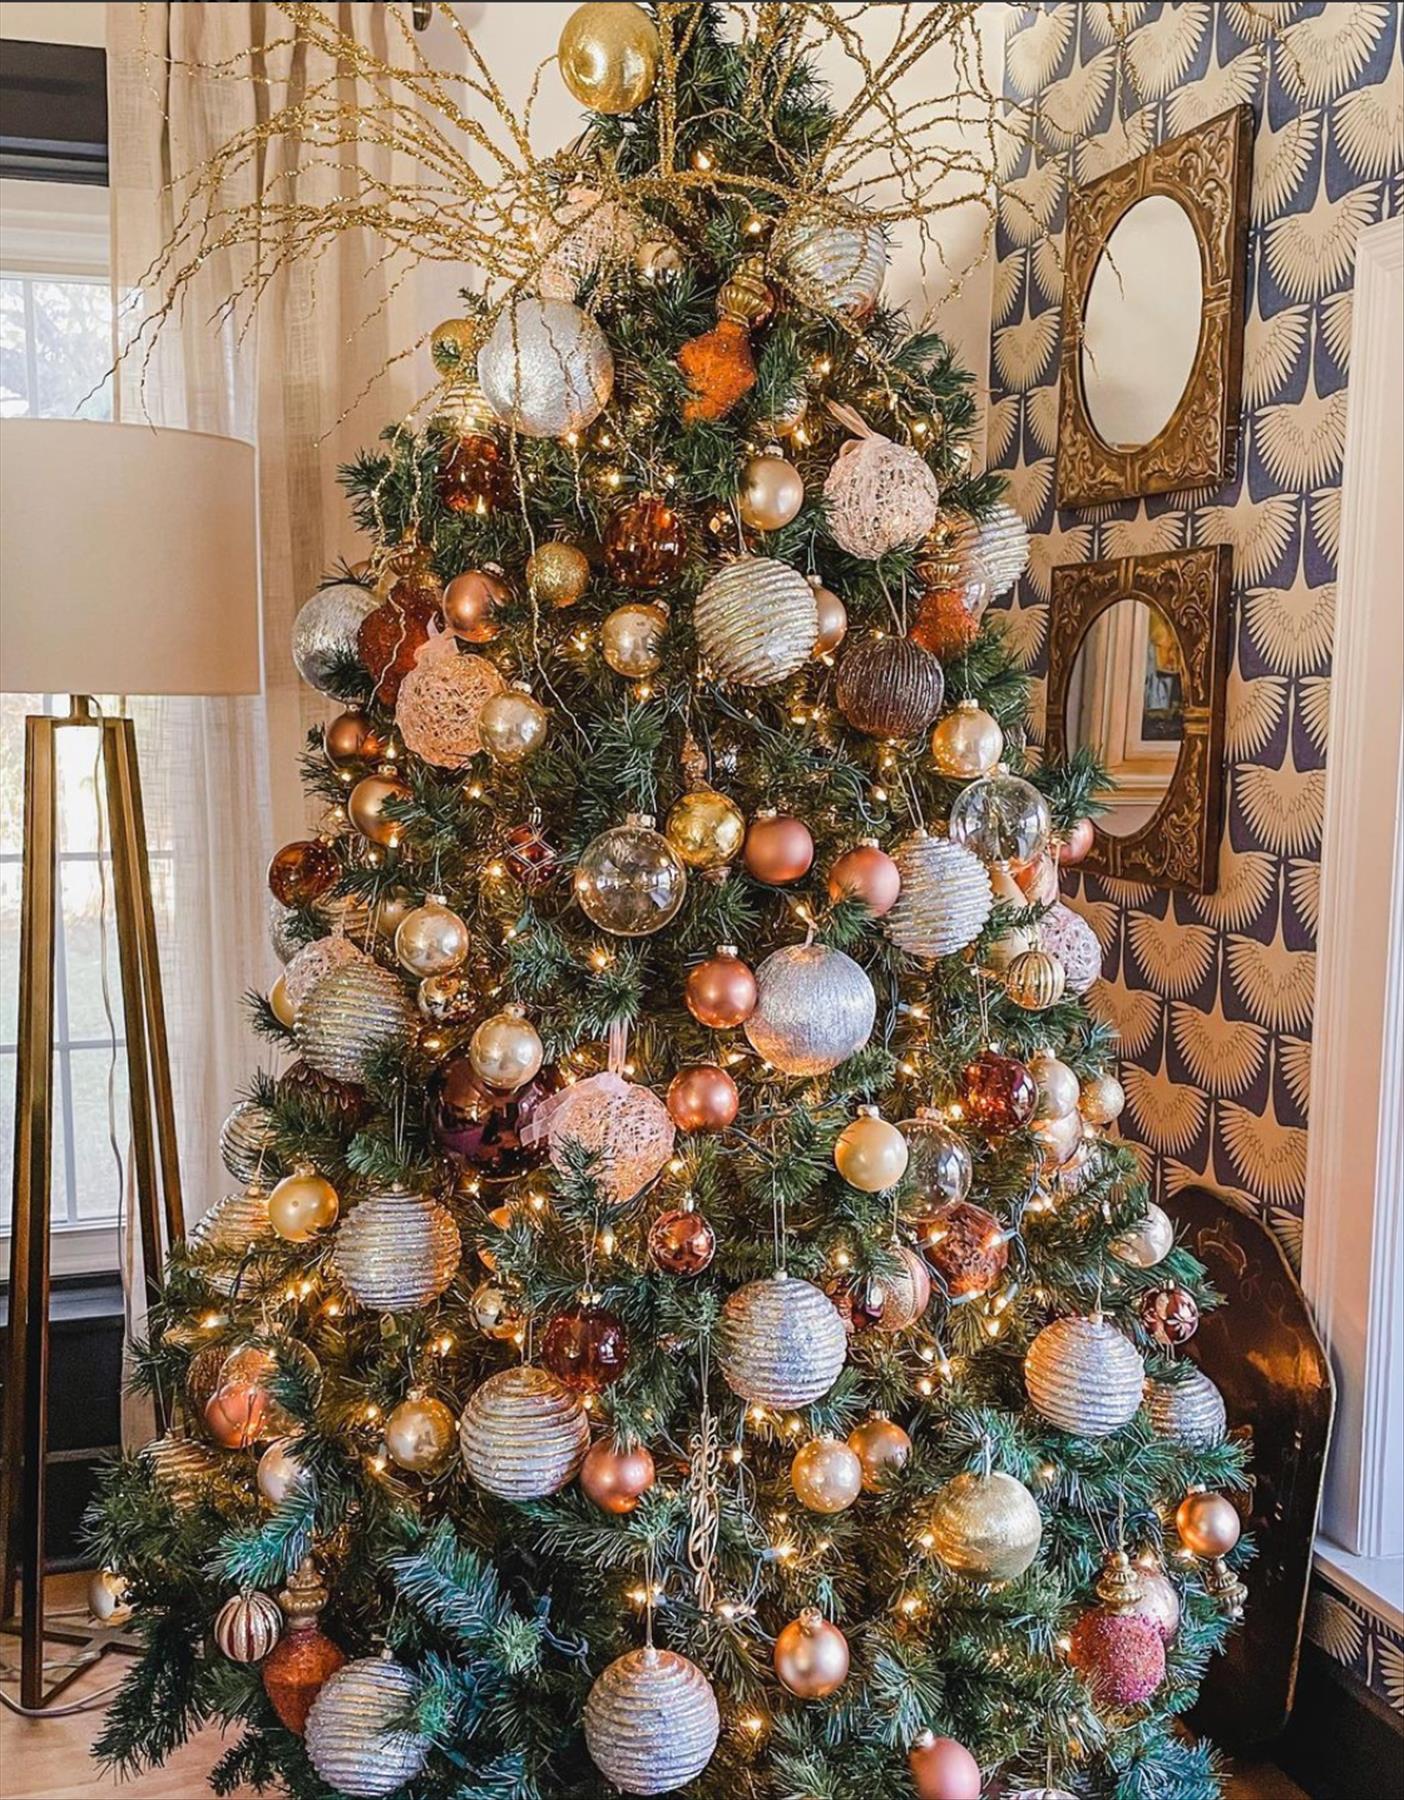 Lovely Christmas Tree ideas 2021 to get inspired